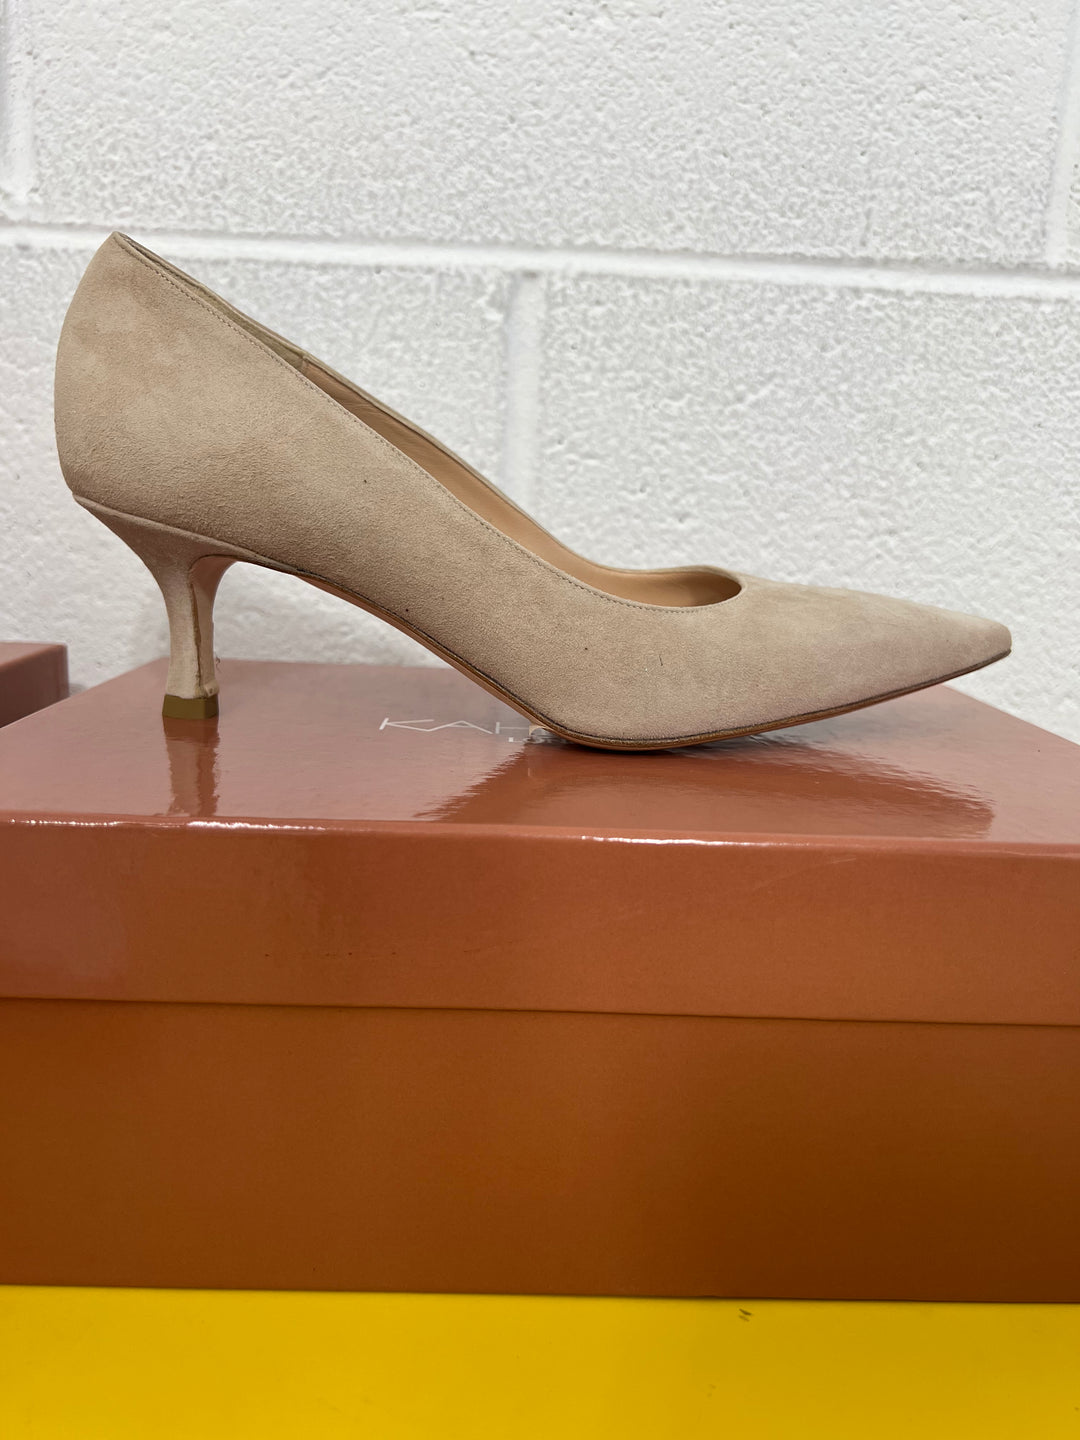 SAMPLE - Becky Pump 50mm - Taupe Suede (one off color)  - EU 39